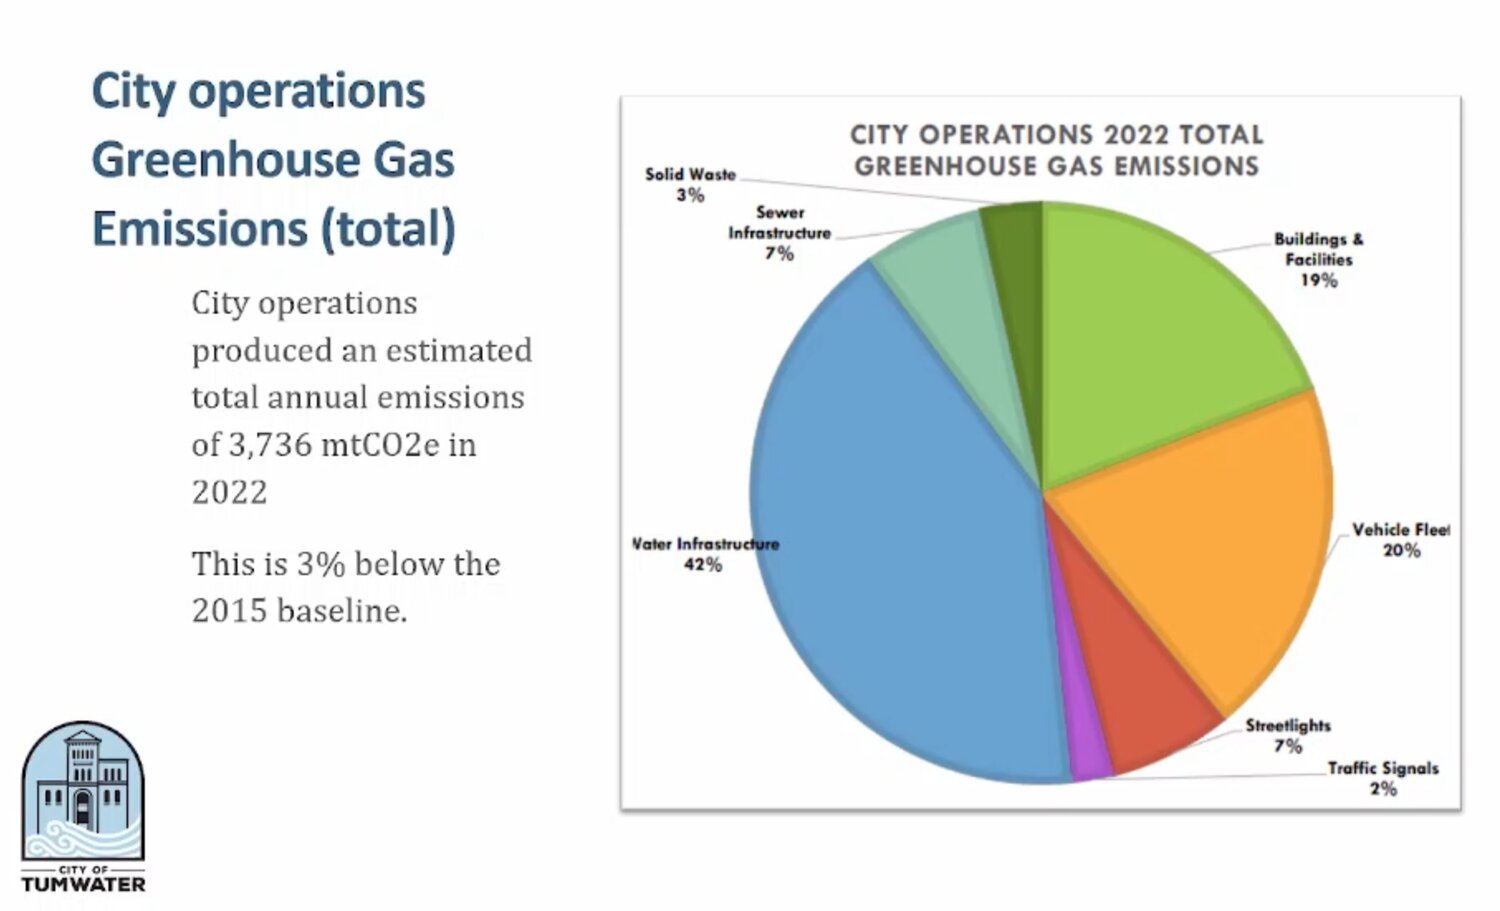 The city’s combined water and sewer infrastructures accounted for almost half of the city’s greenhouse gas emissions.